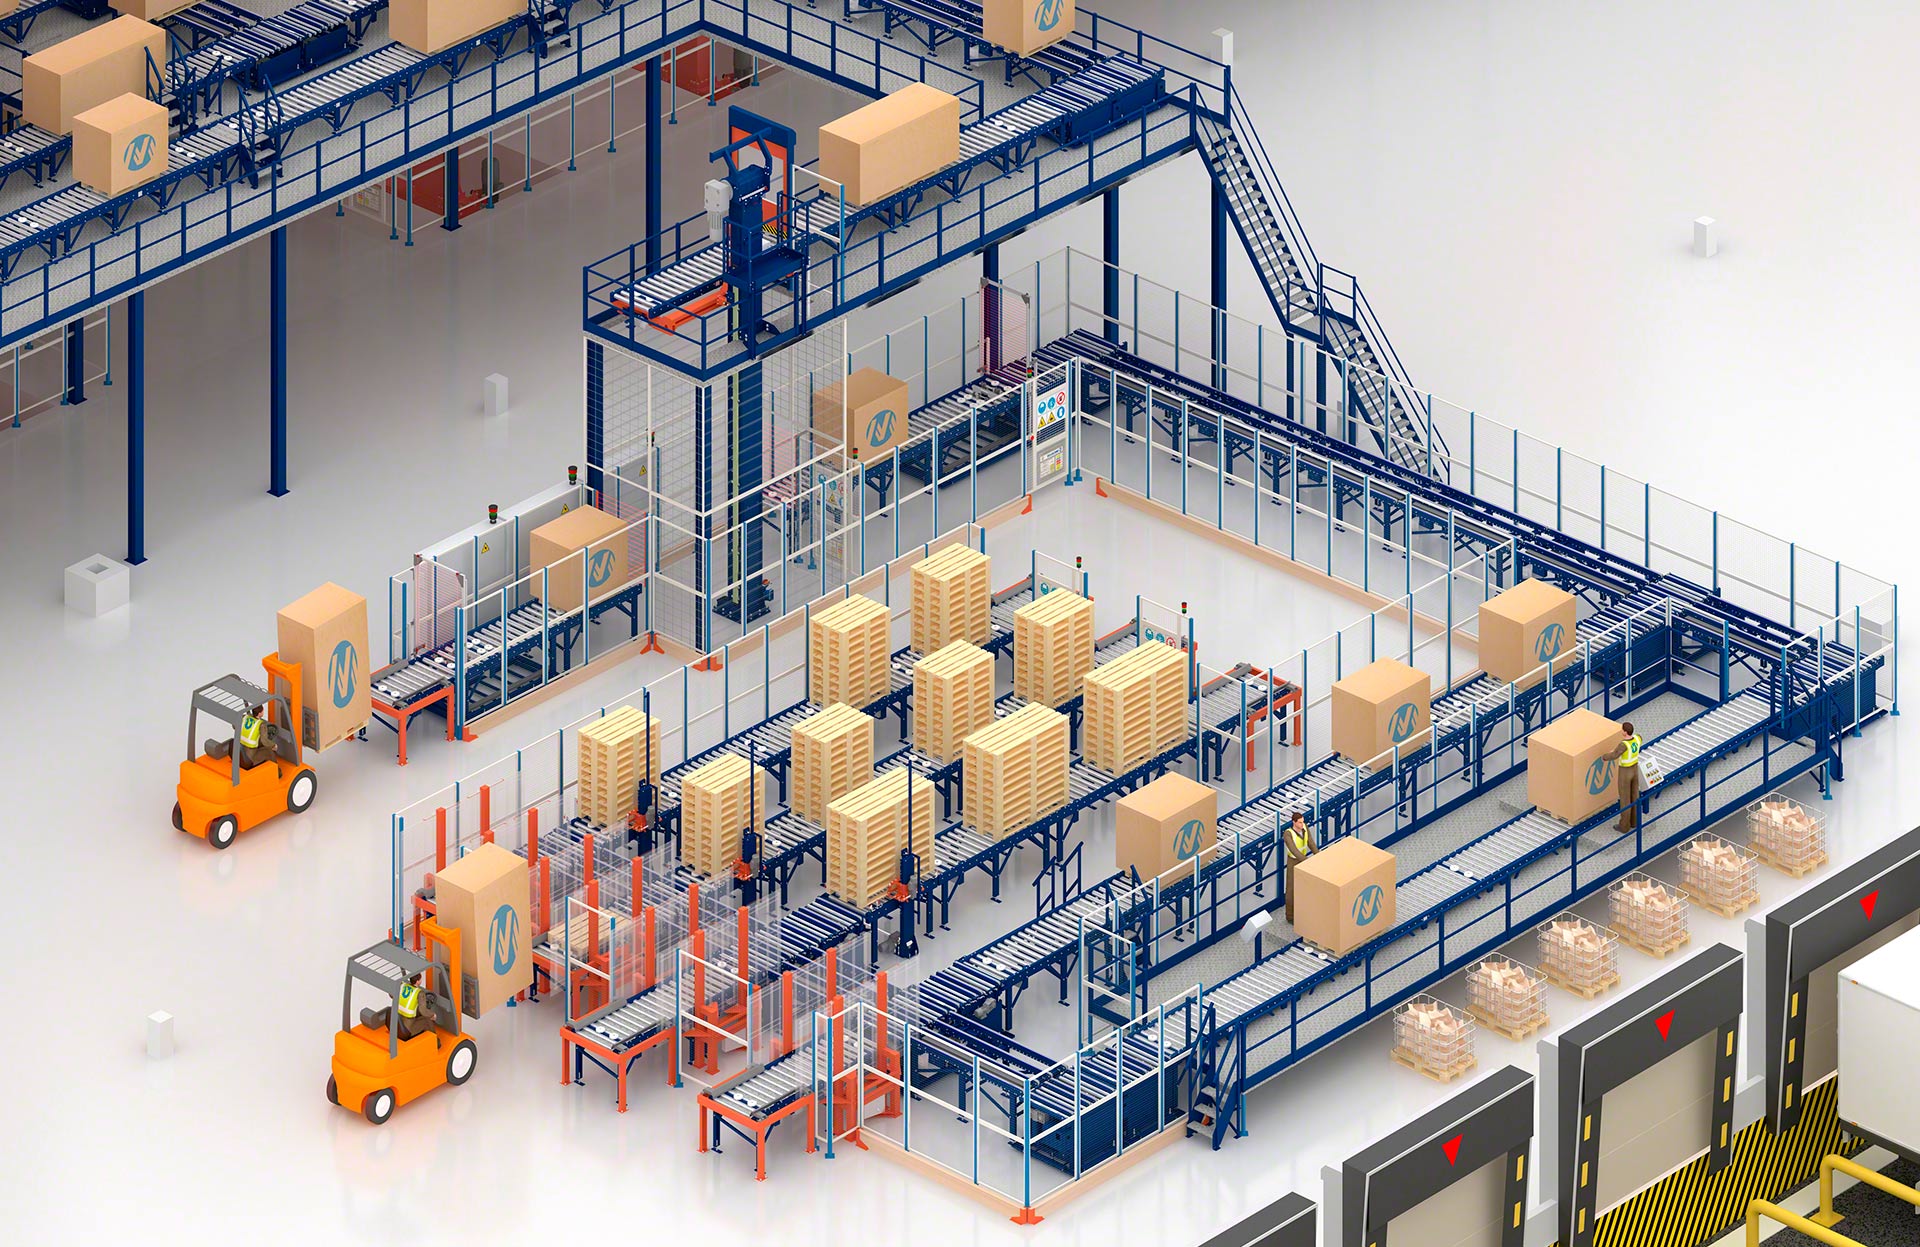 Vertical conveyor systems accelerate the automatic flow of pallets